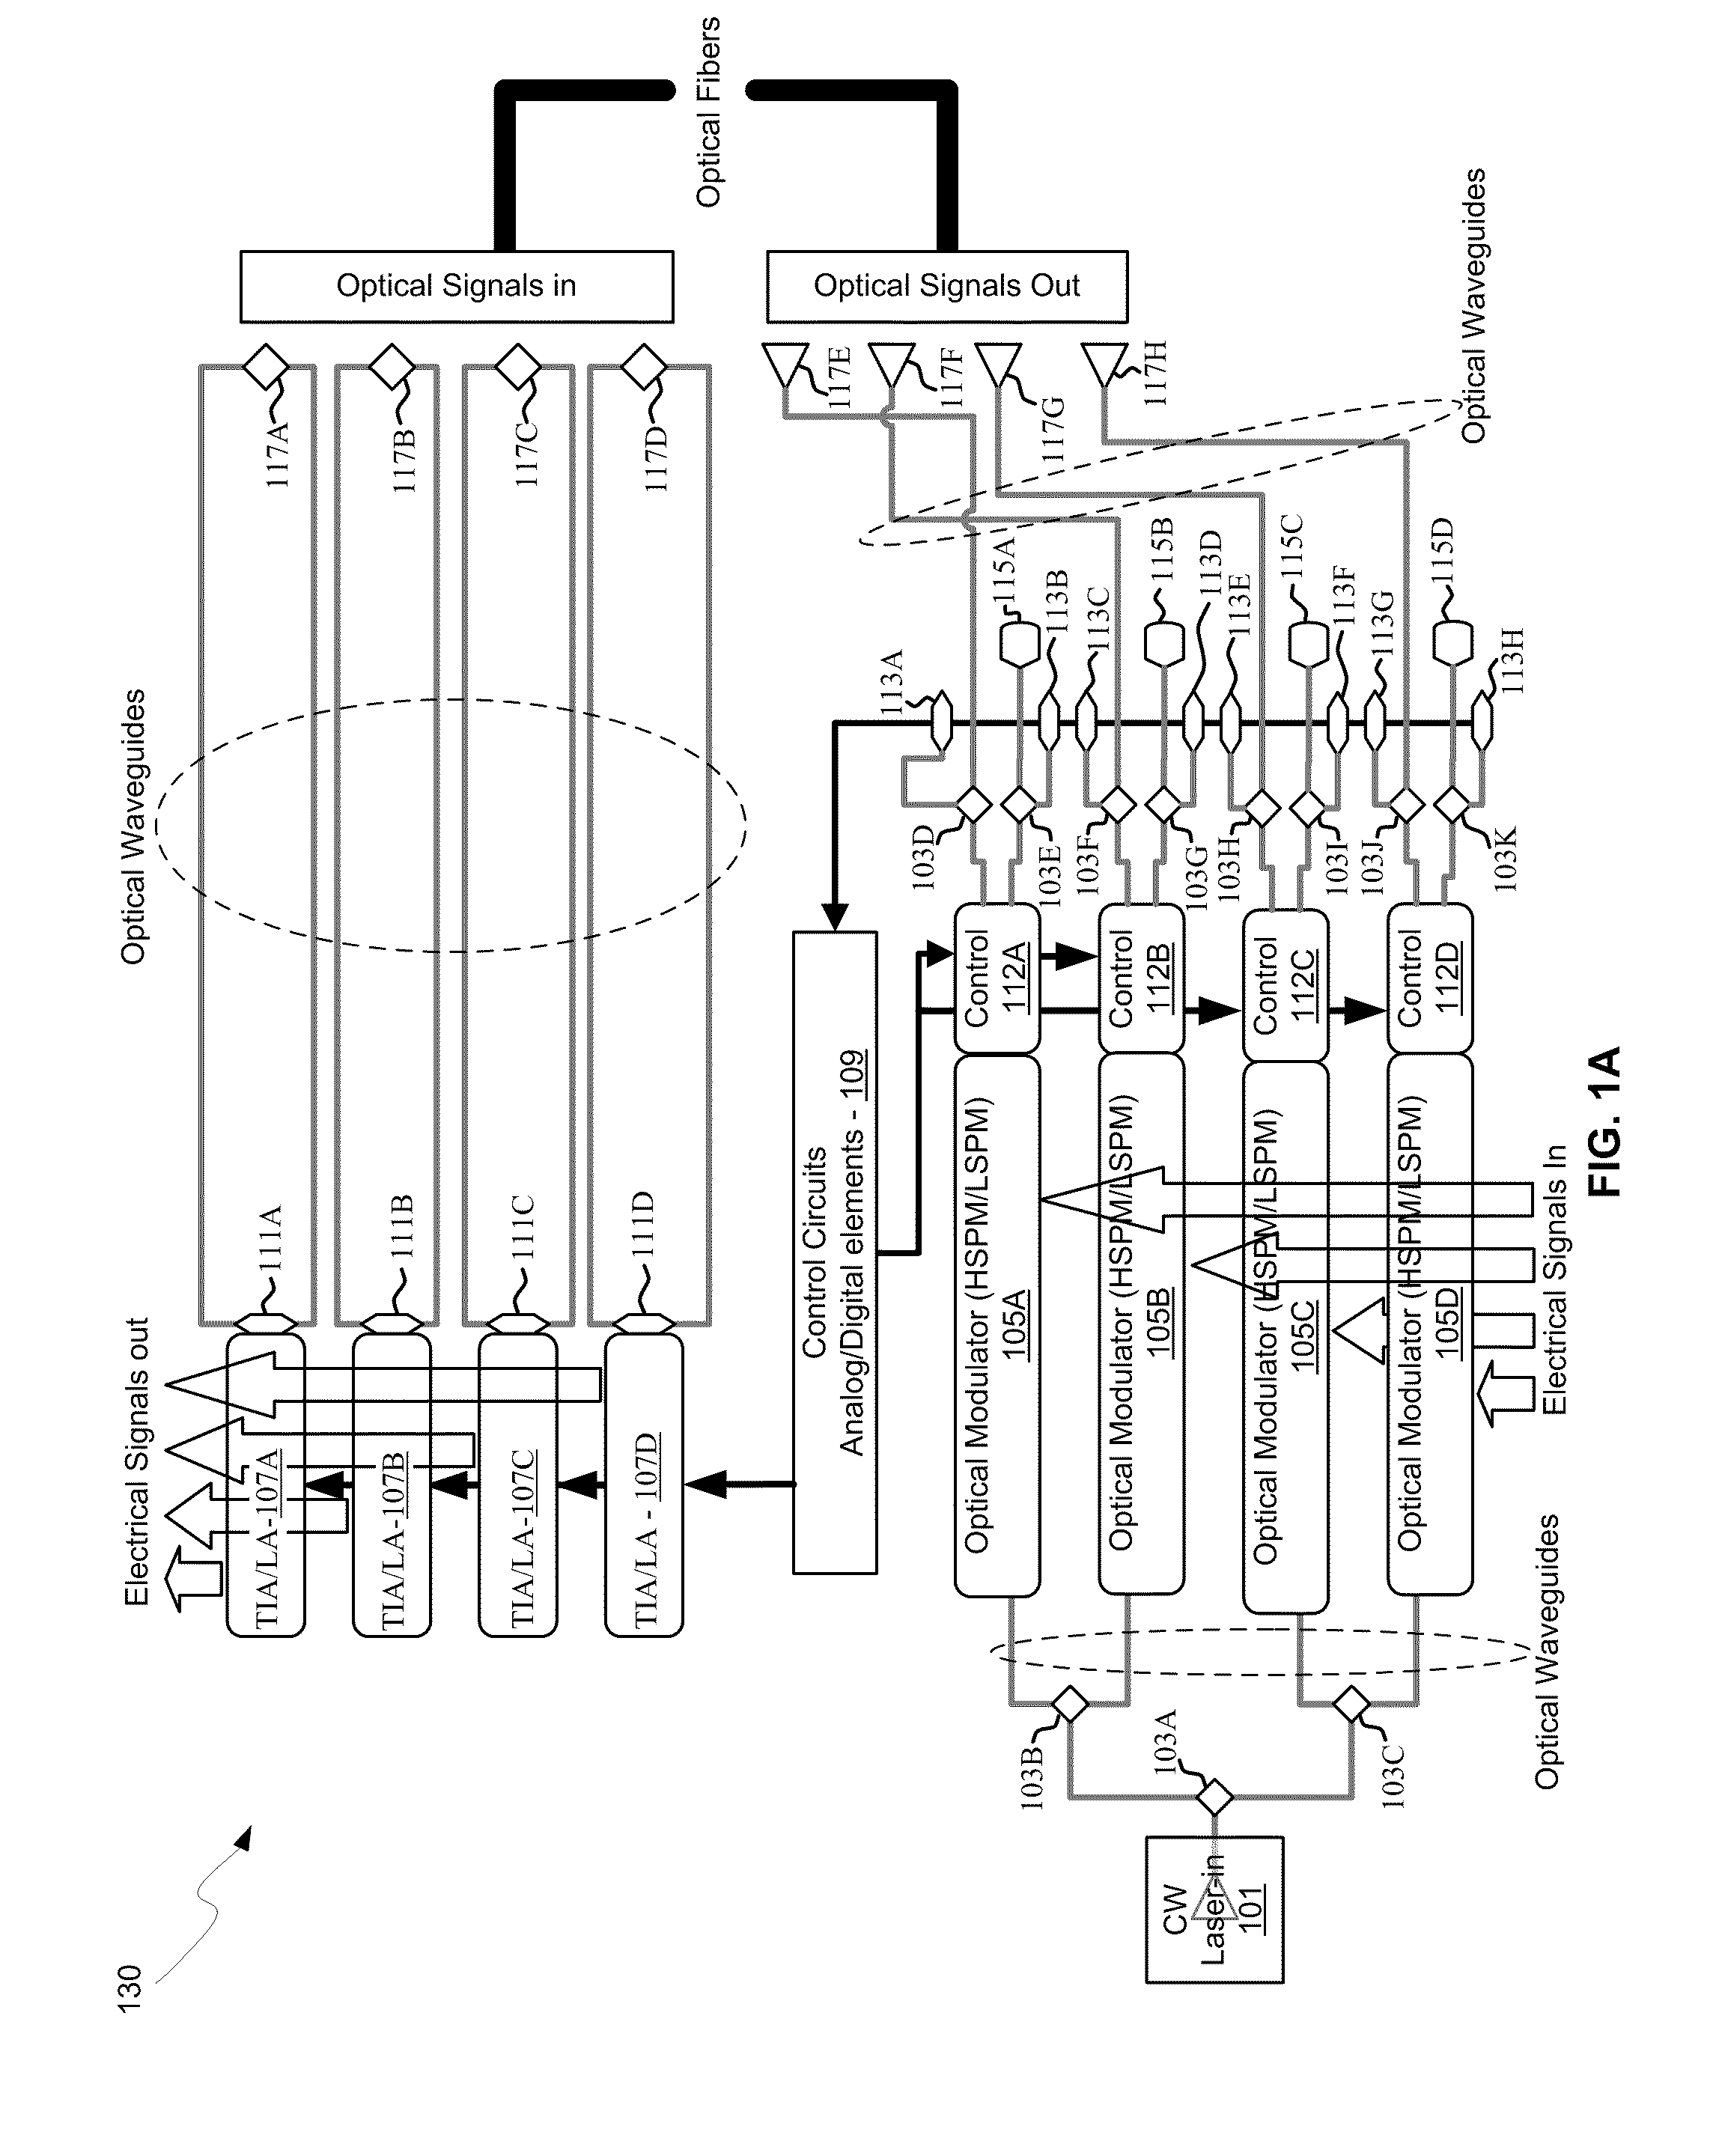 Method and System for Single Laser Bidirectional Links